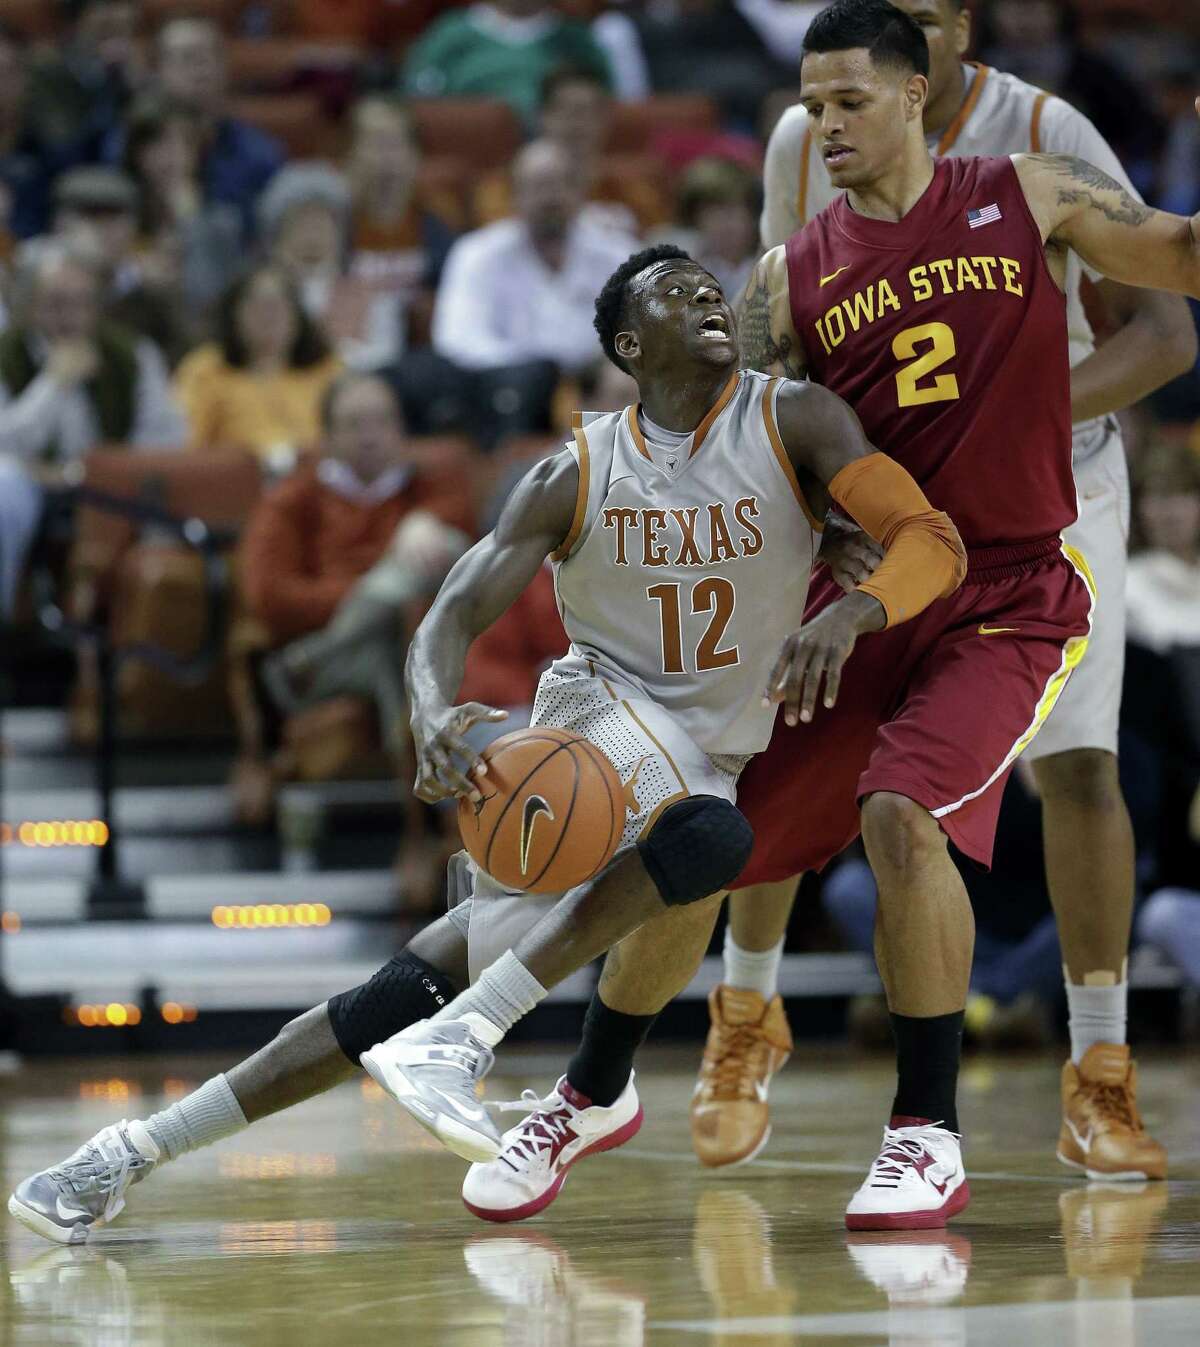 Texas' Myck Kabongo scored 13 points and dished out seven assists in a double-overtime victory over Iowa State on Wednesday. He and the Longhorns visit the Kansas Jayhawks tonight.